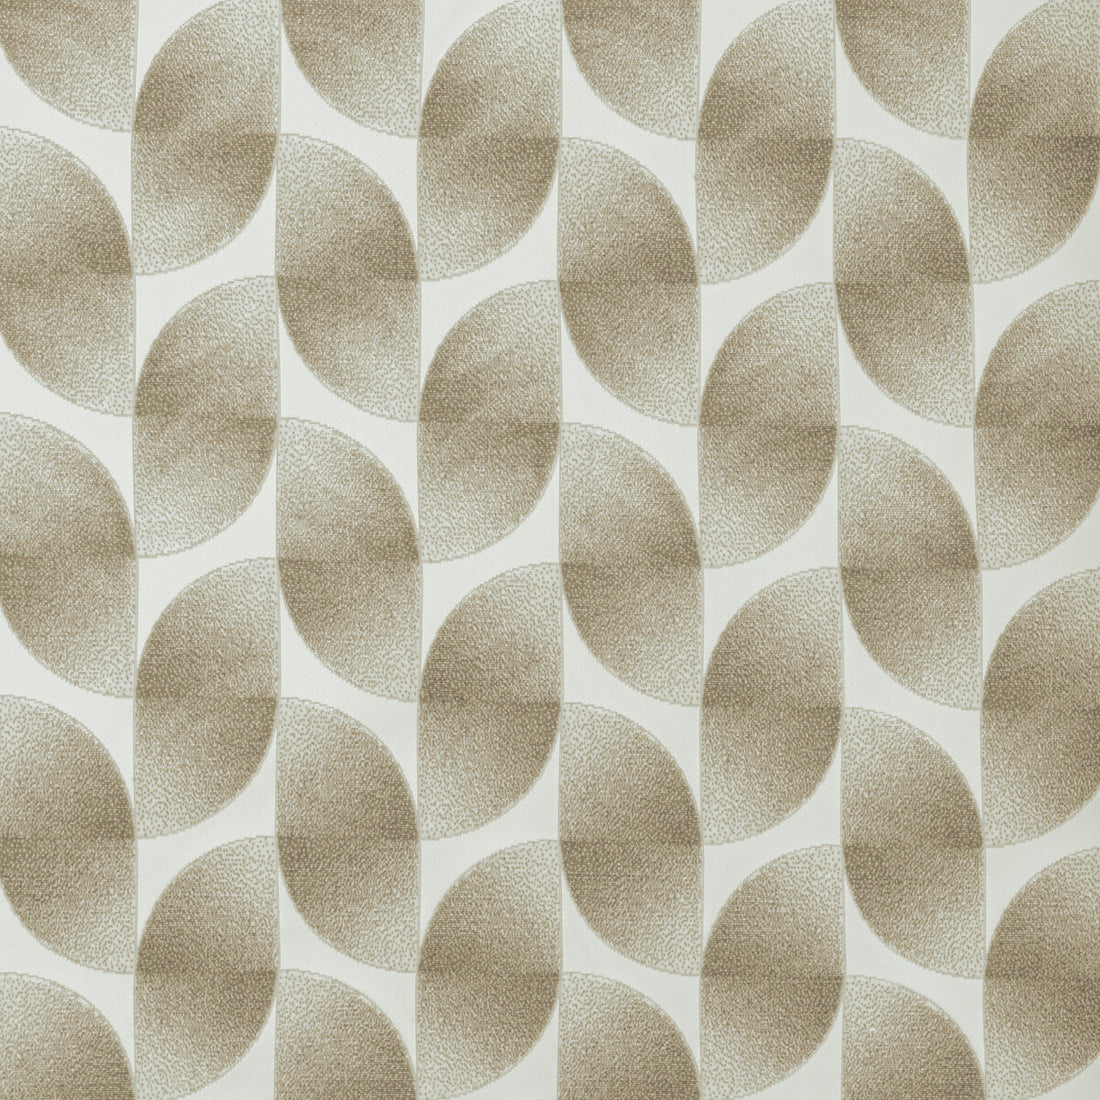 Moon Splice fabric in gold color - pattern 36576.416.0 - by Kravet Couture in the Modern Luxe Silk Luster collection